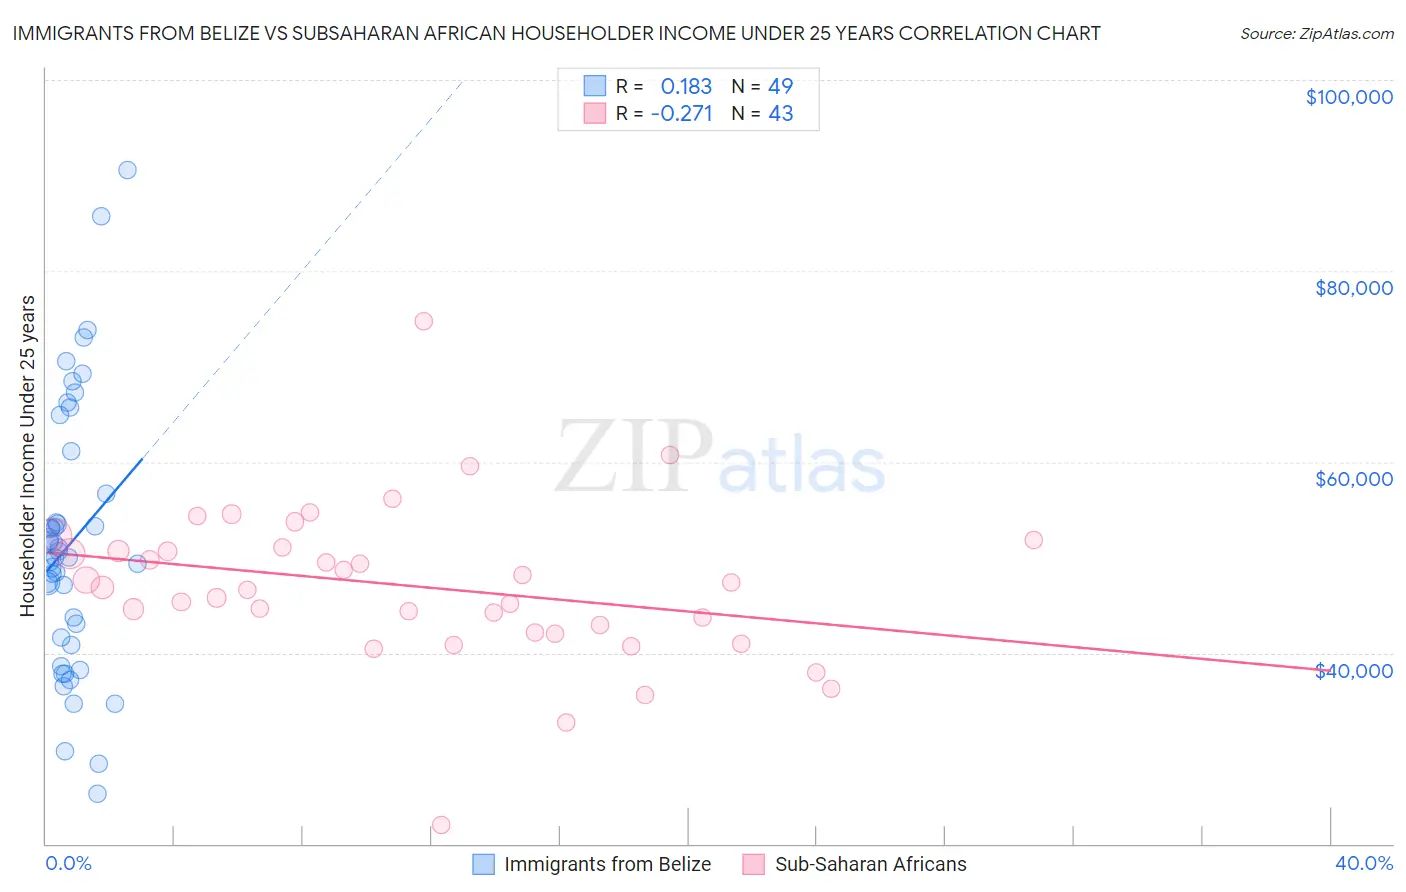 Immigrants from Belize vs Subsaharan African Householder Income Under 25 years